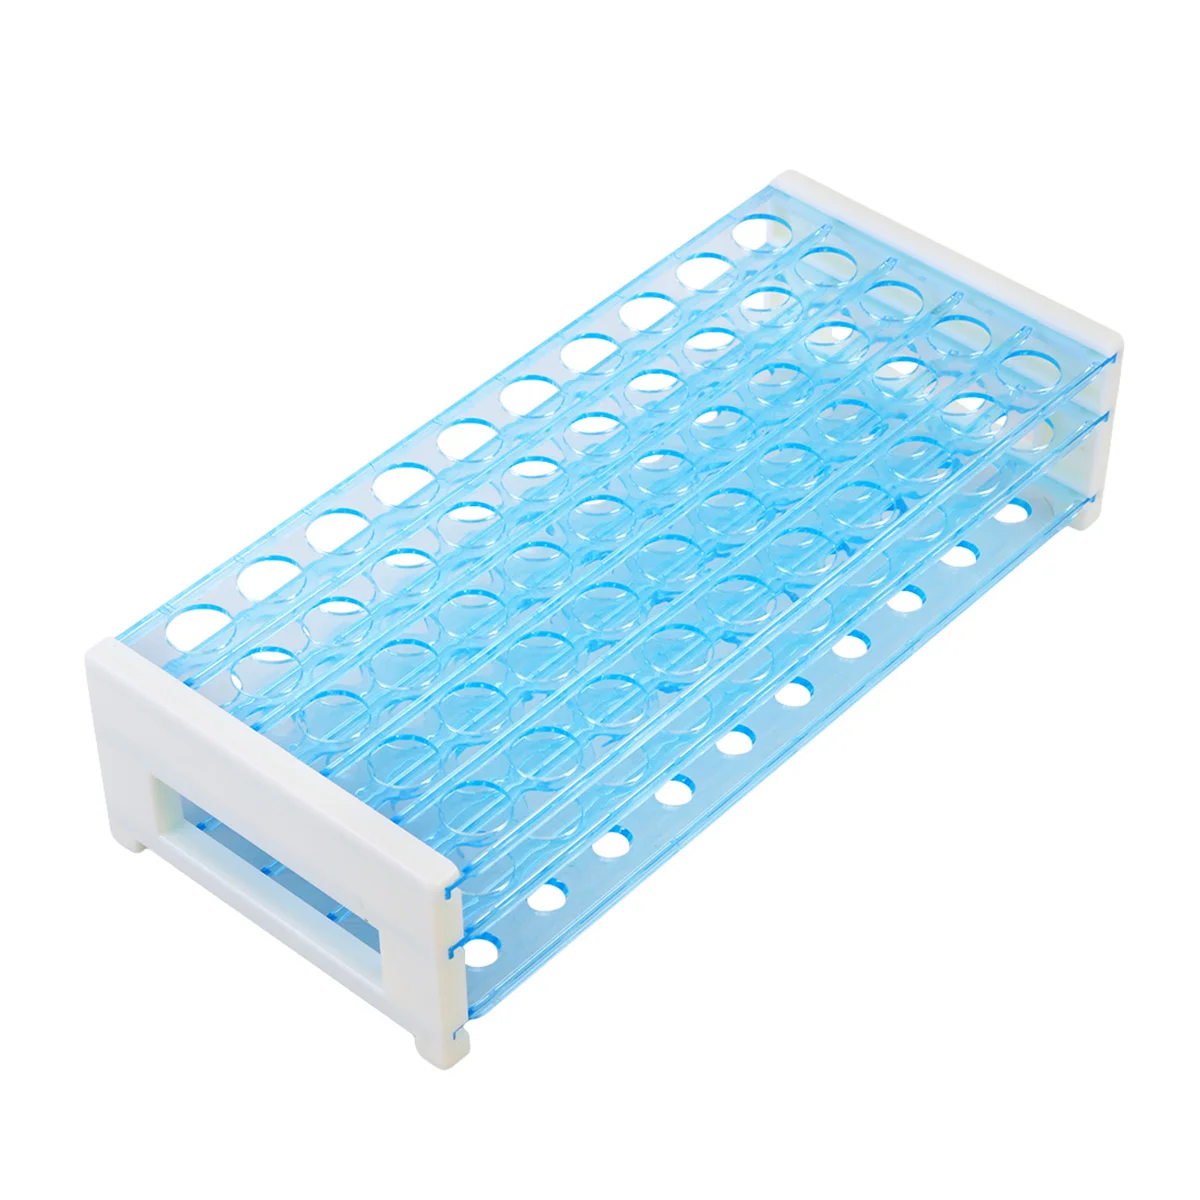 

Test Tube Rack, 50 Vents Test Tube Rack Holder for 15mm Test Tubes, Detachable, Laboratory Supplies Pipe Stand for School ( 50